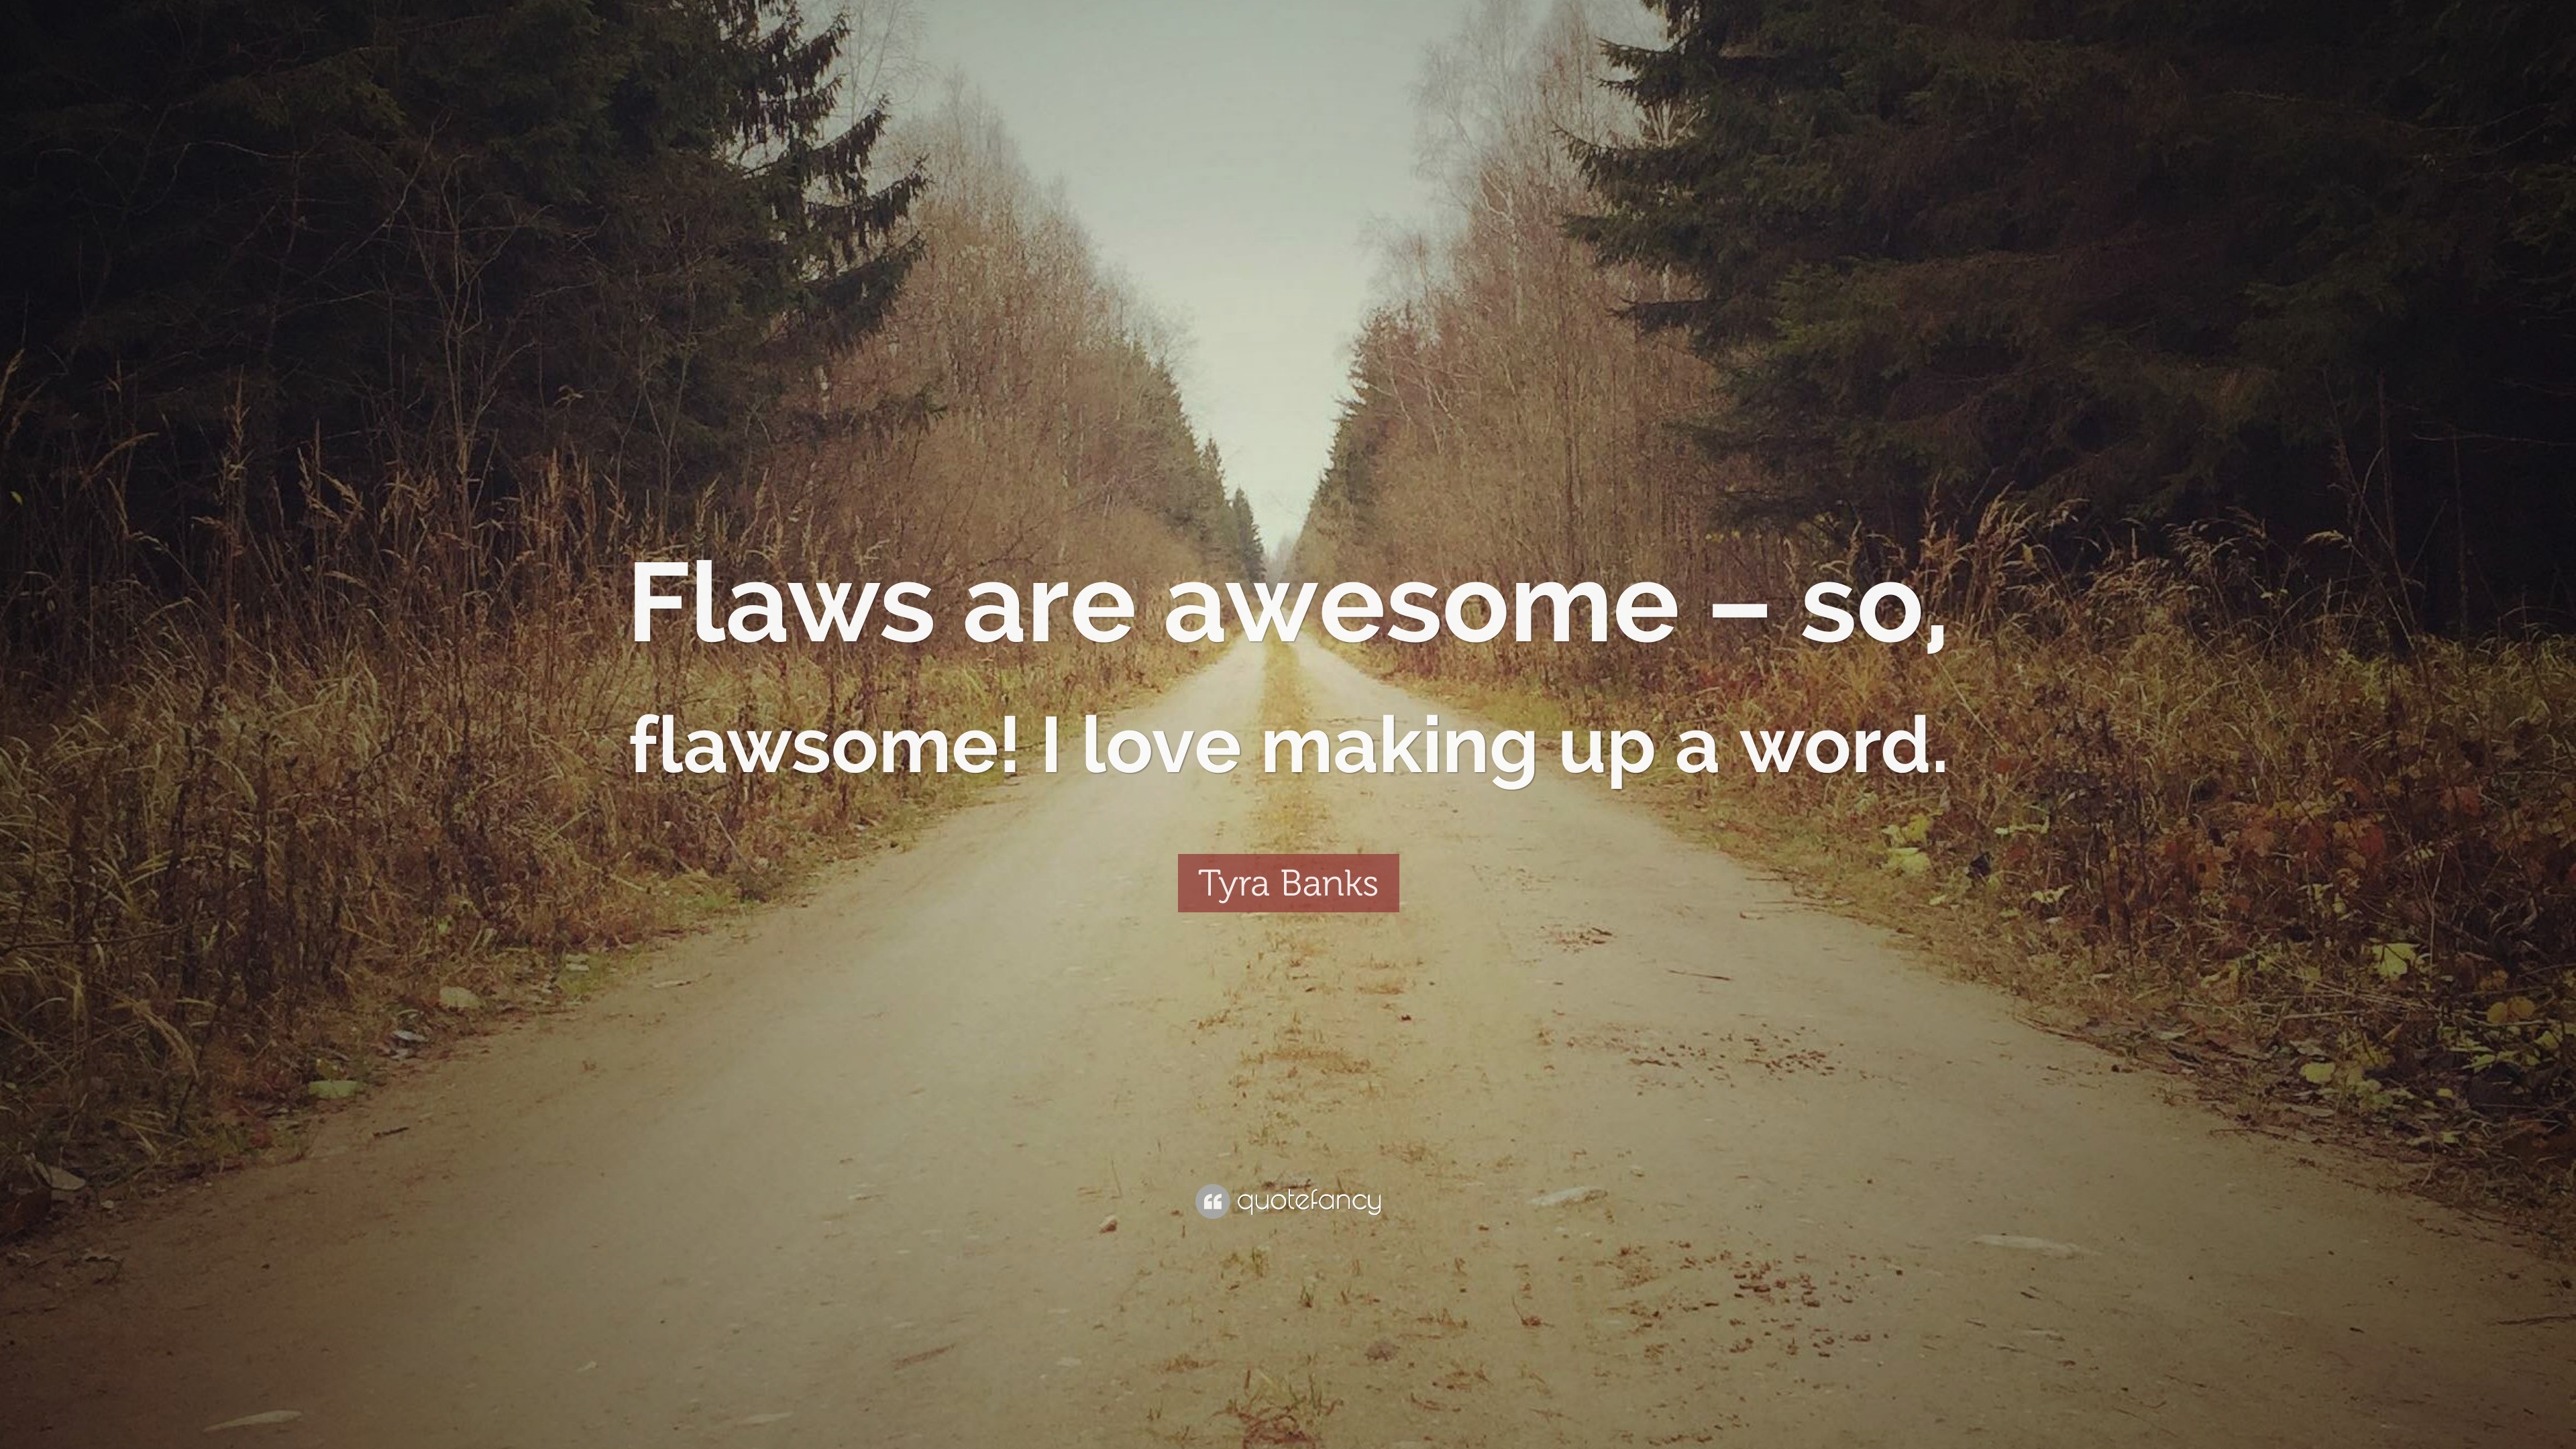 Tyra Banks Quote “Flaws are awesome – so flawsome I love making